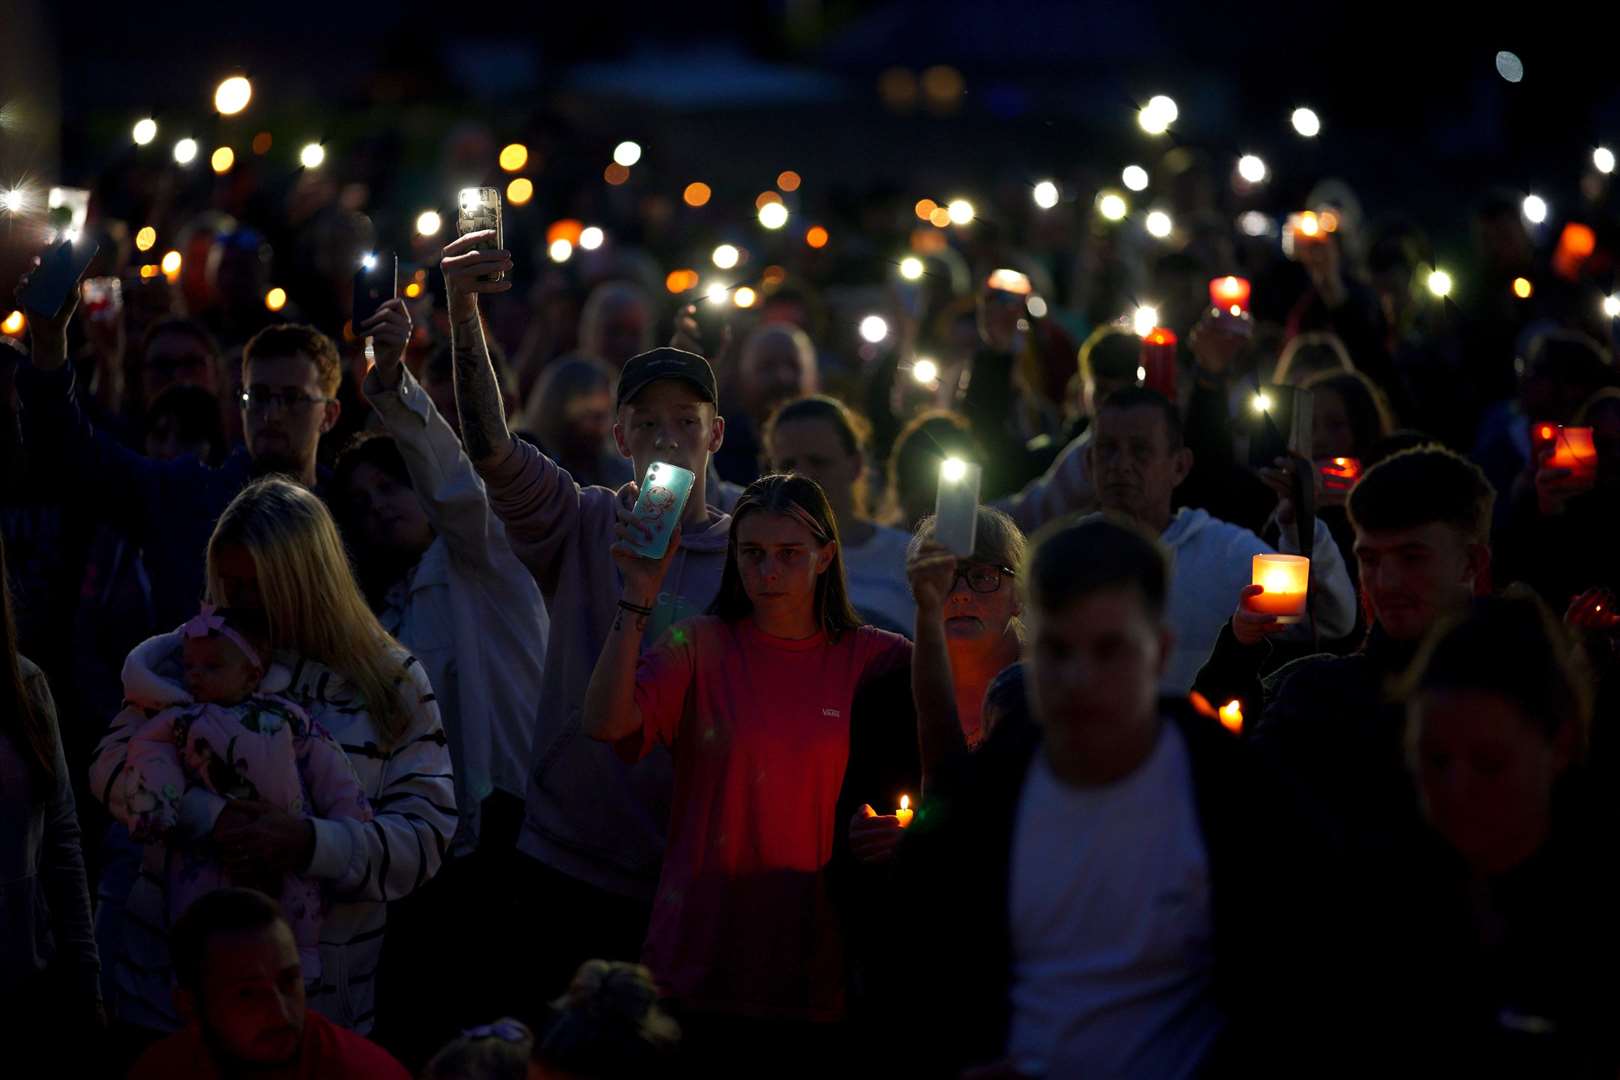 A vigil for the victims of the Keyham mass shooting at North Down Crescent Park in Keyham, Plymouth (Ben Birchall/PA)